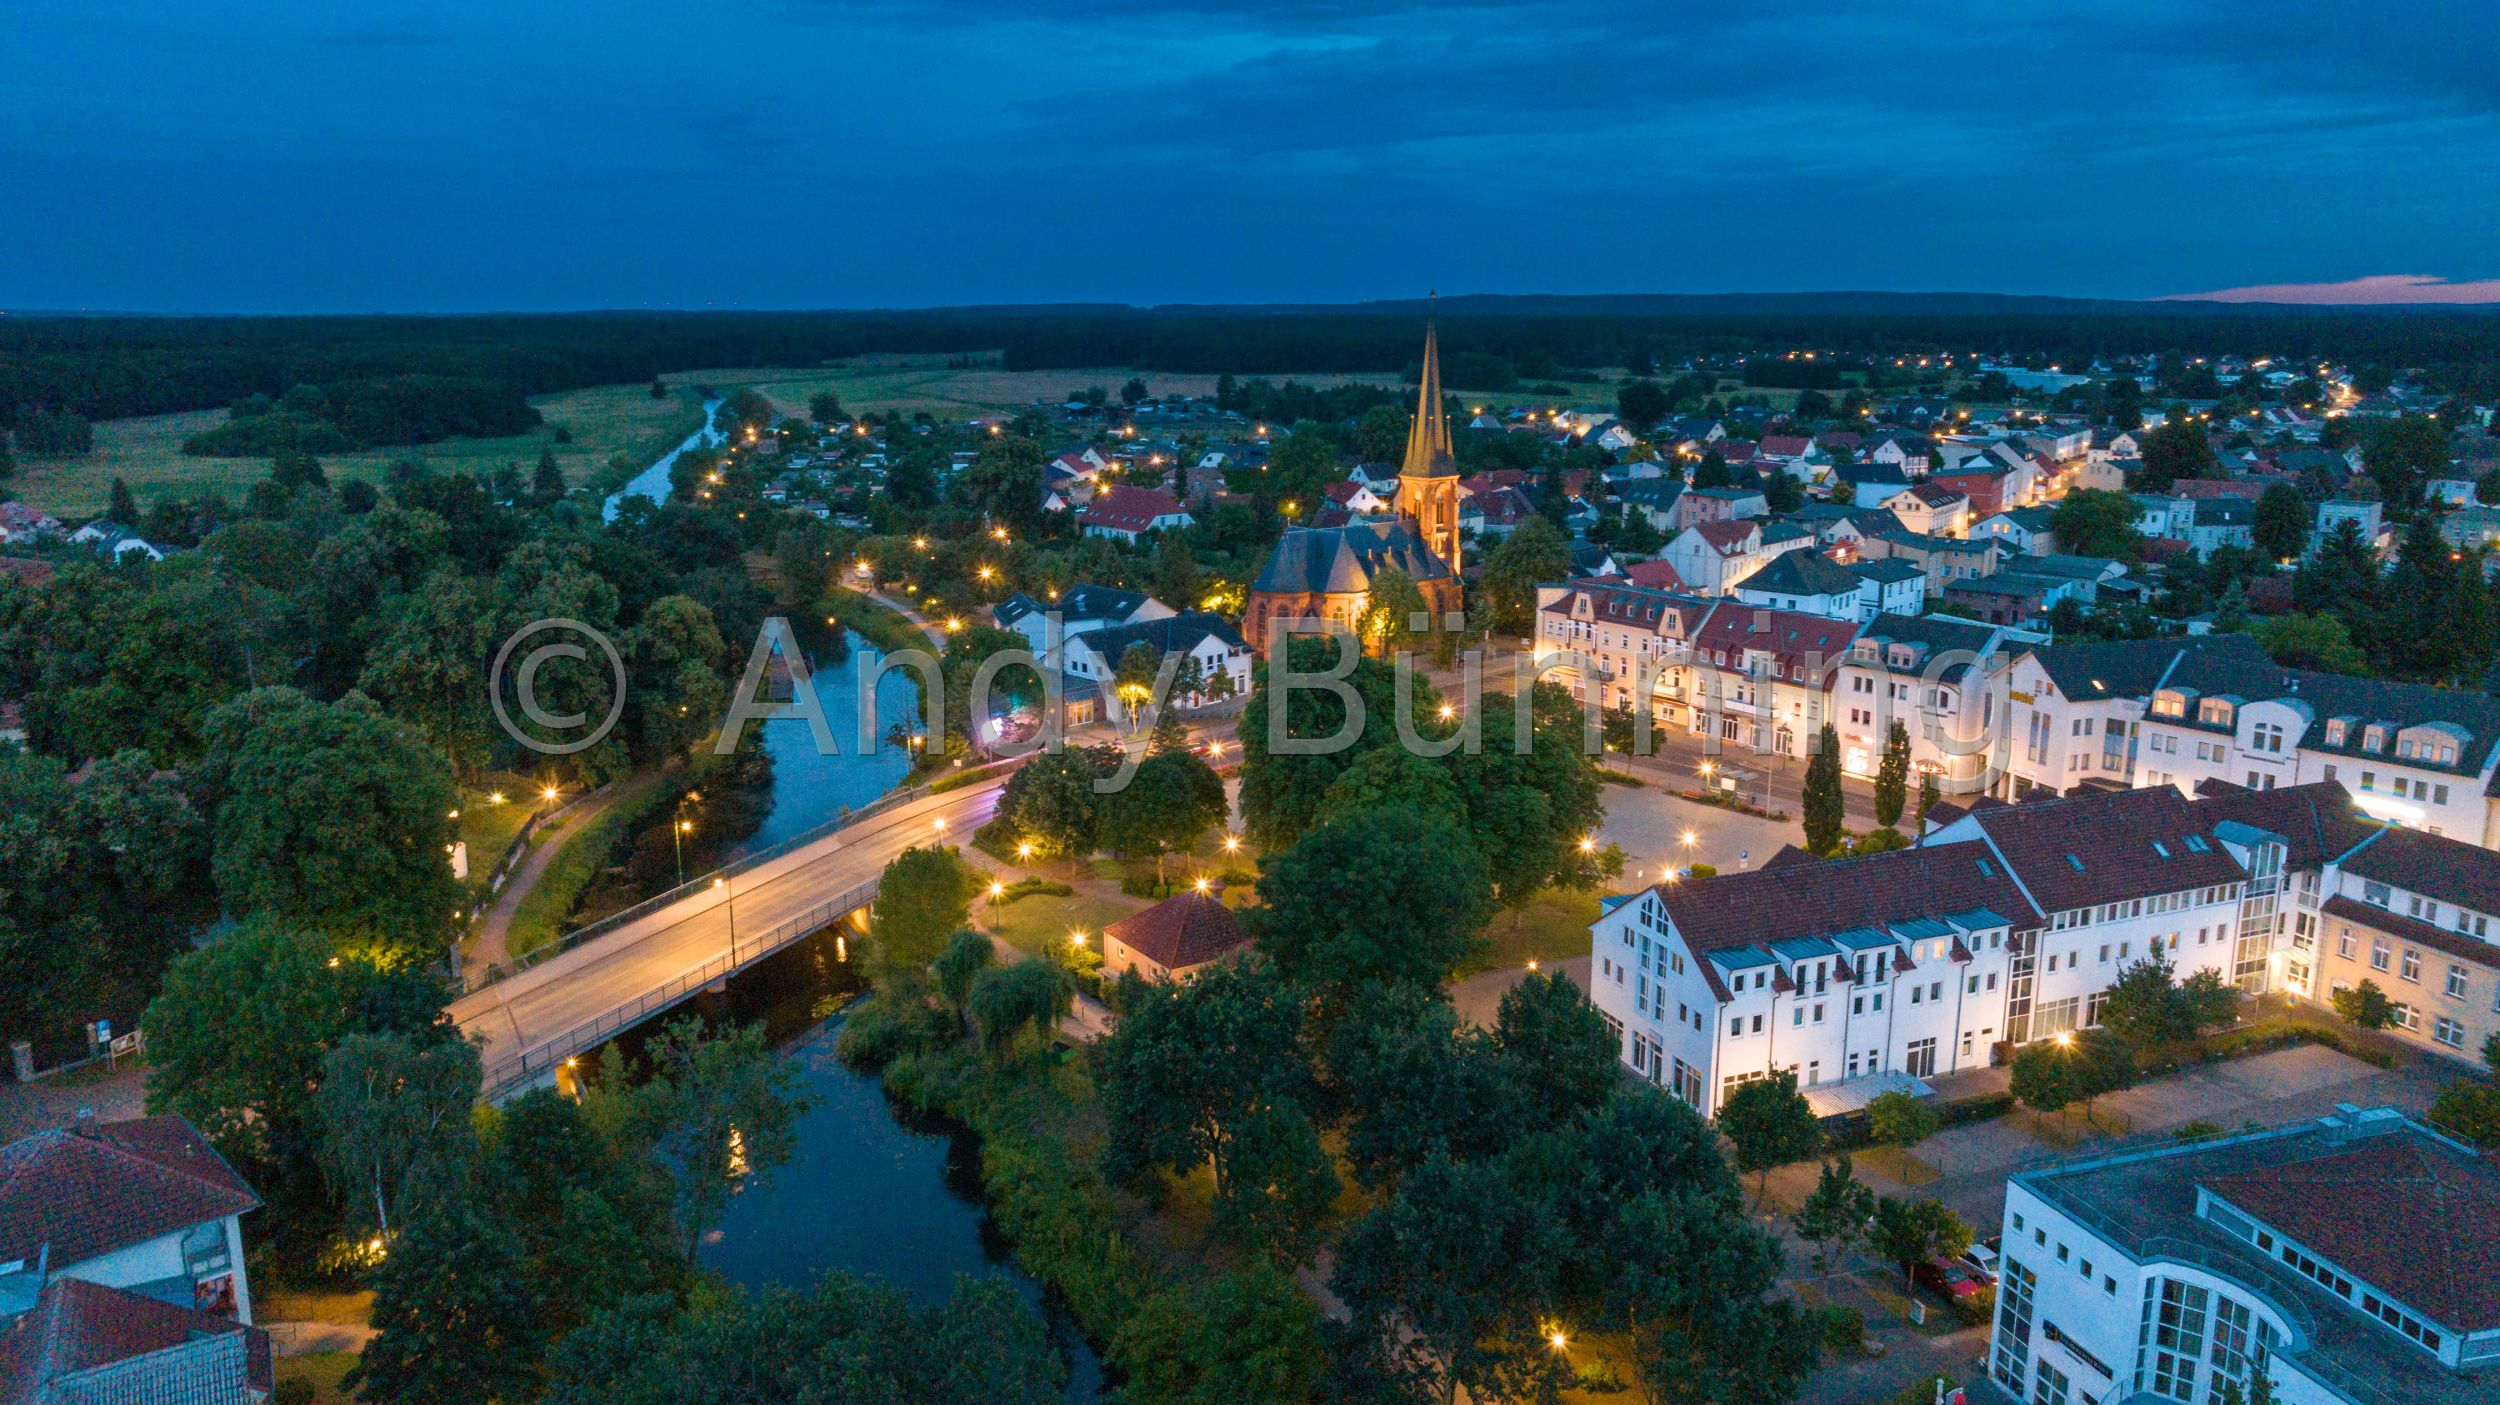 Preview ab230717_Torgelow-Abends_0001.jpg